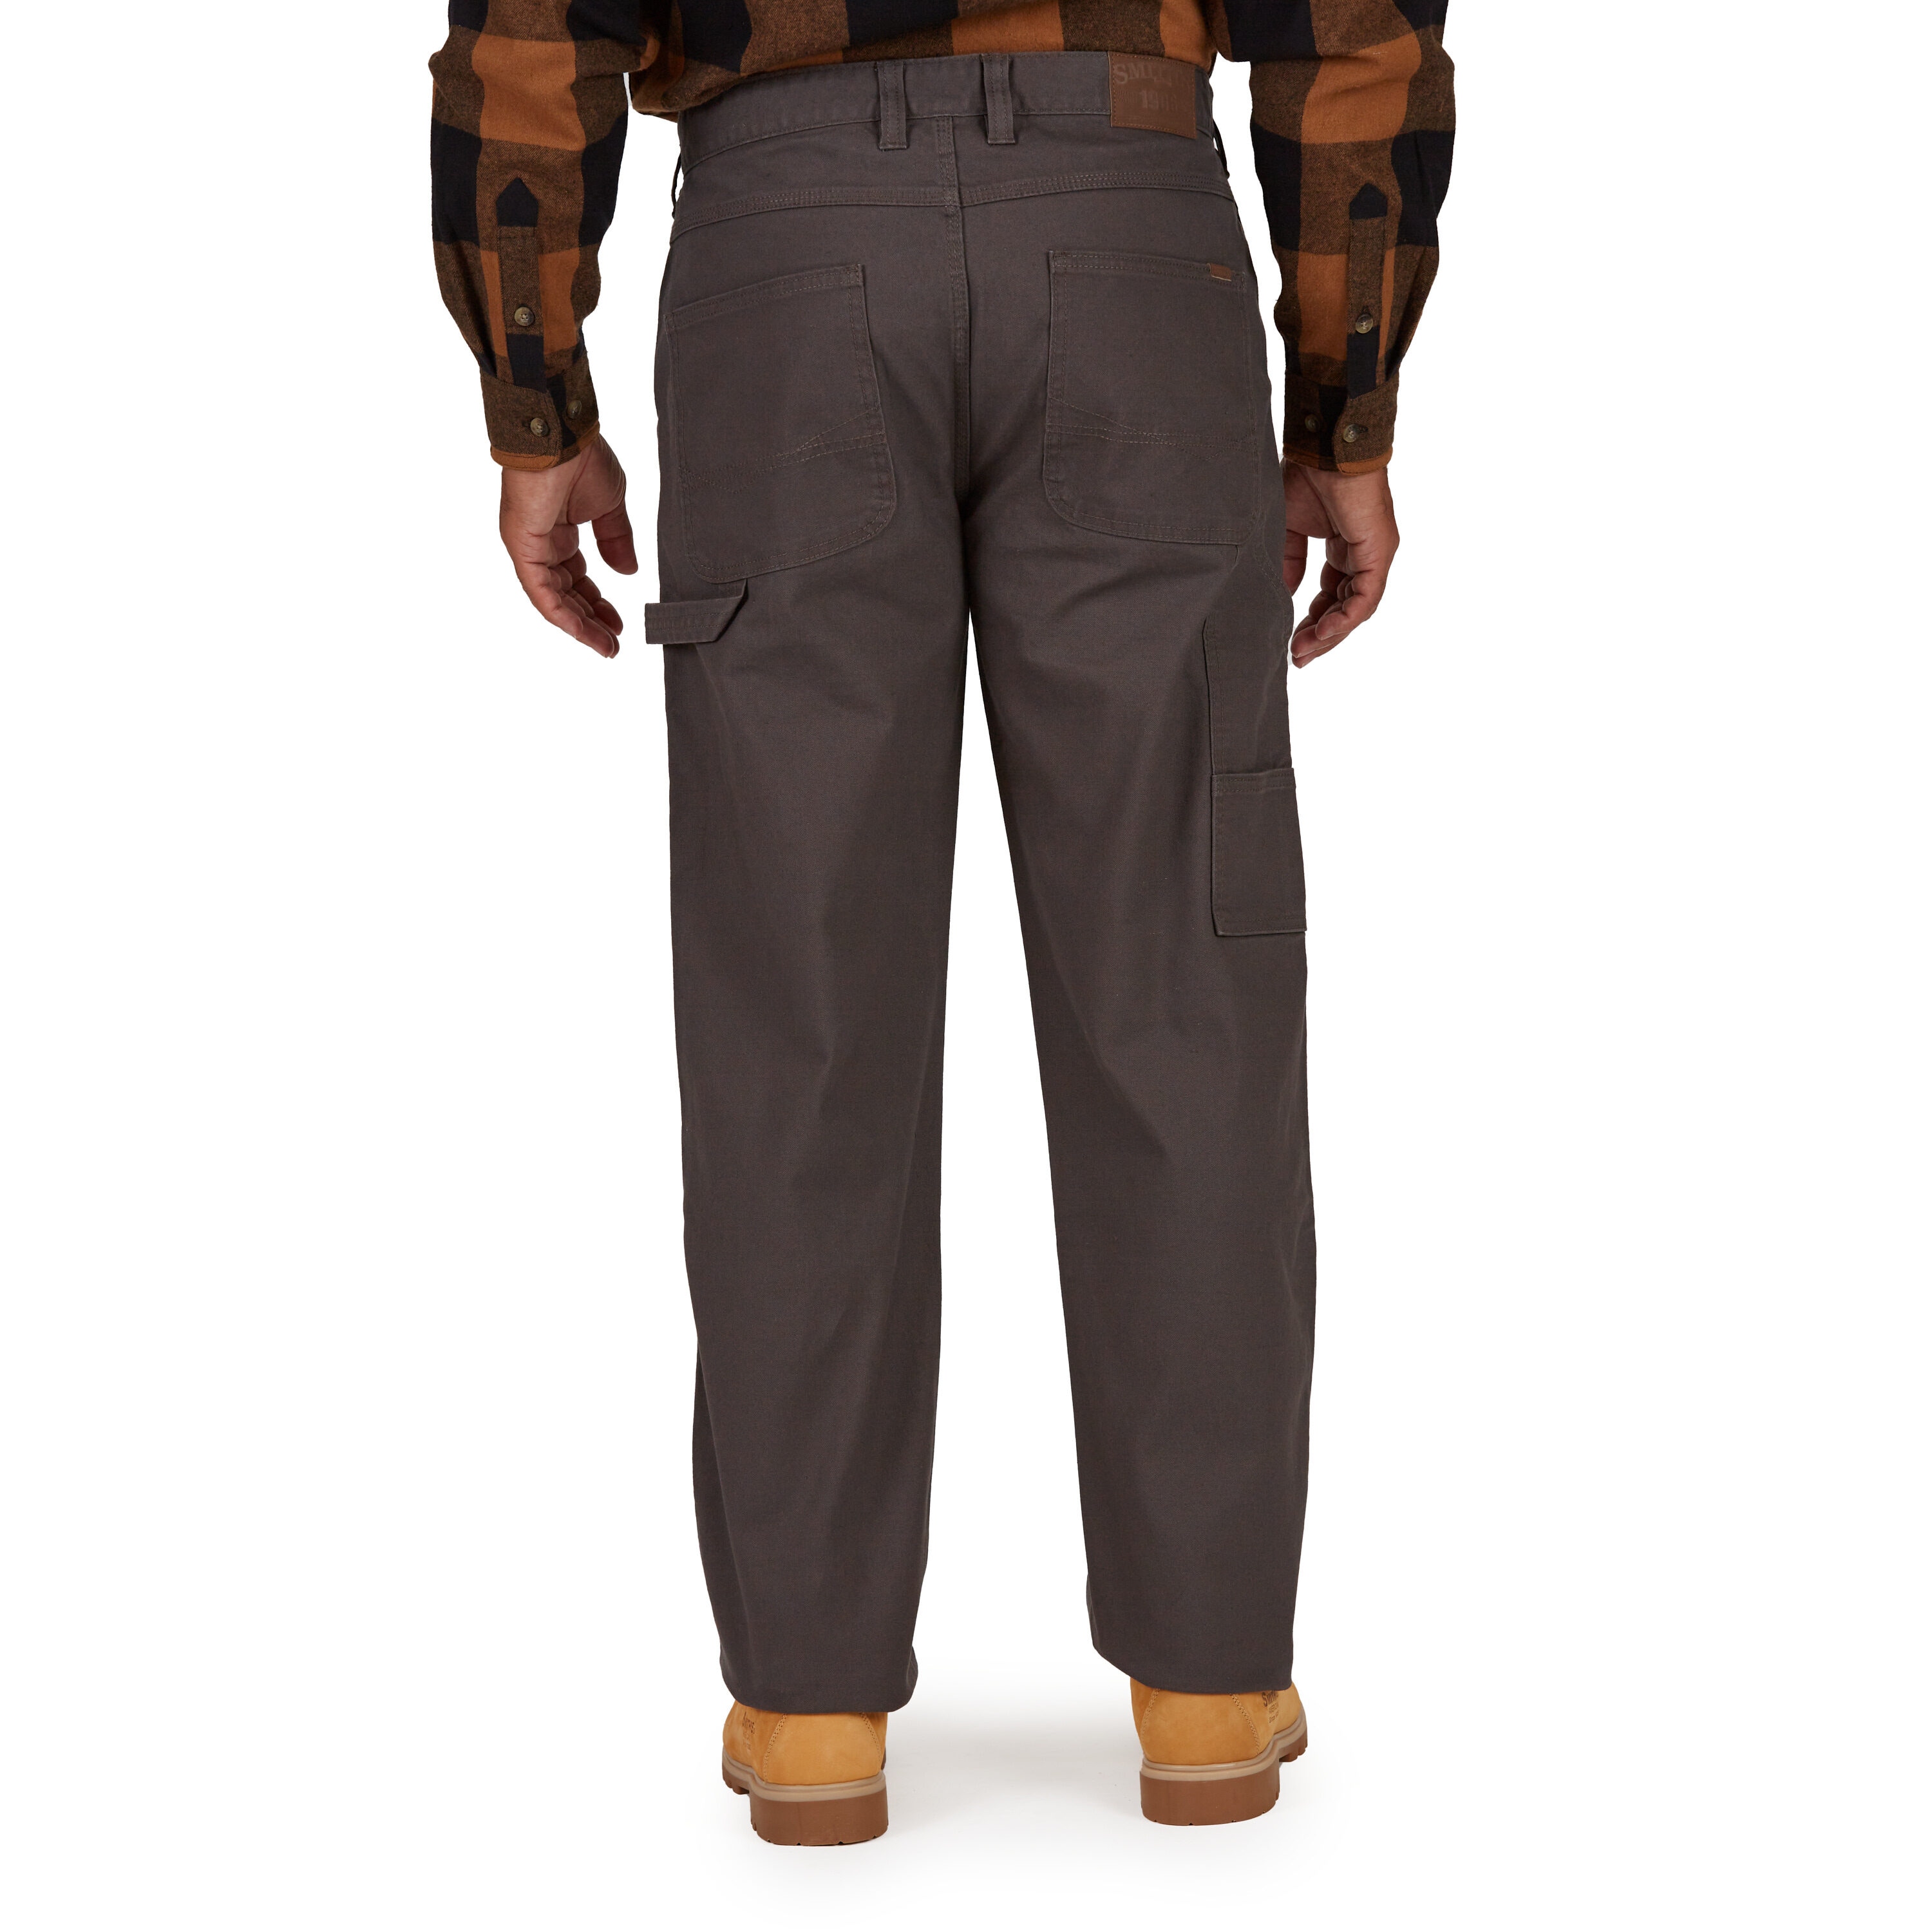 Men's Smith's Workwear Stretch Fleece-Lined Canvas Cargo Pant